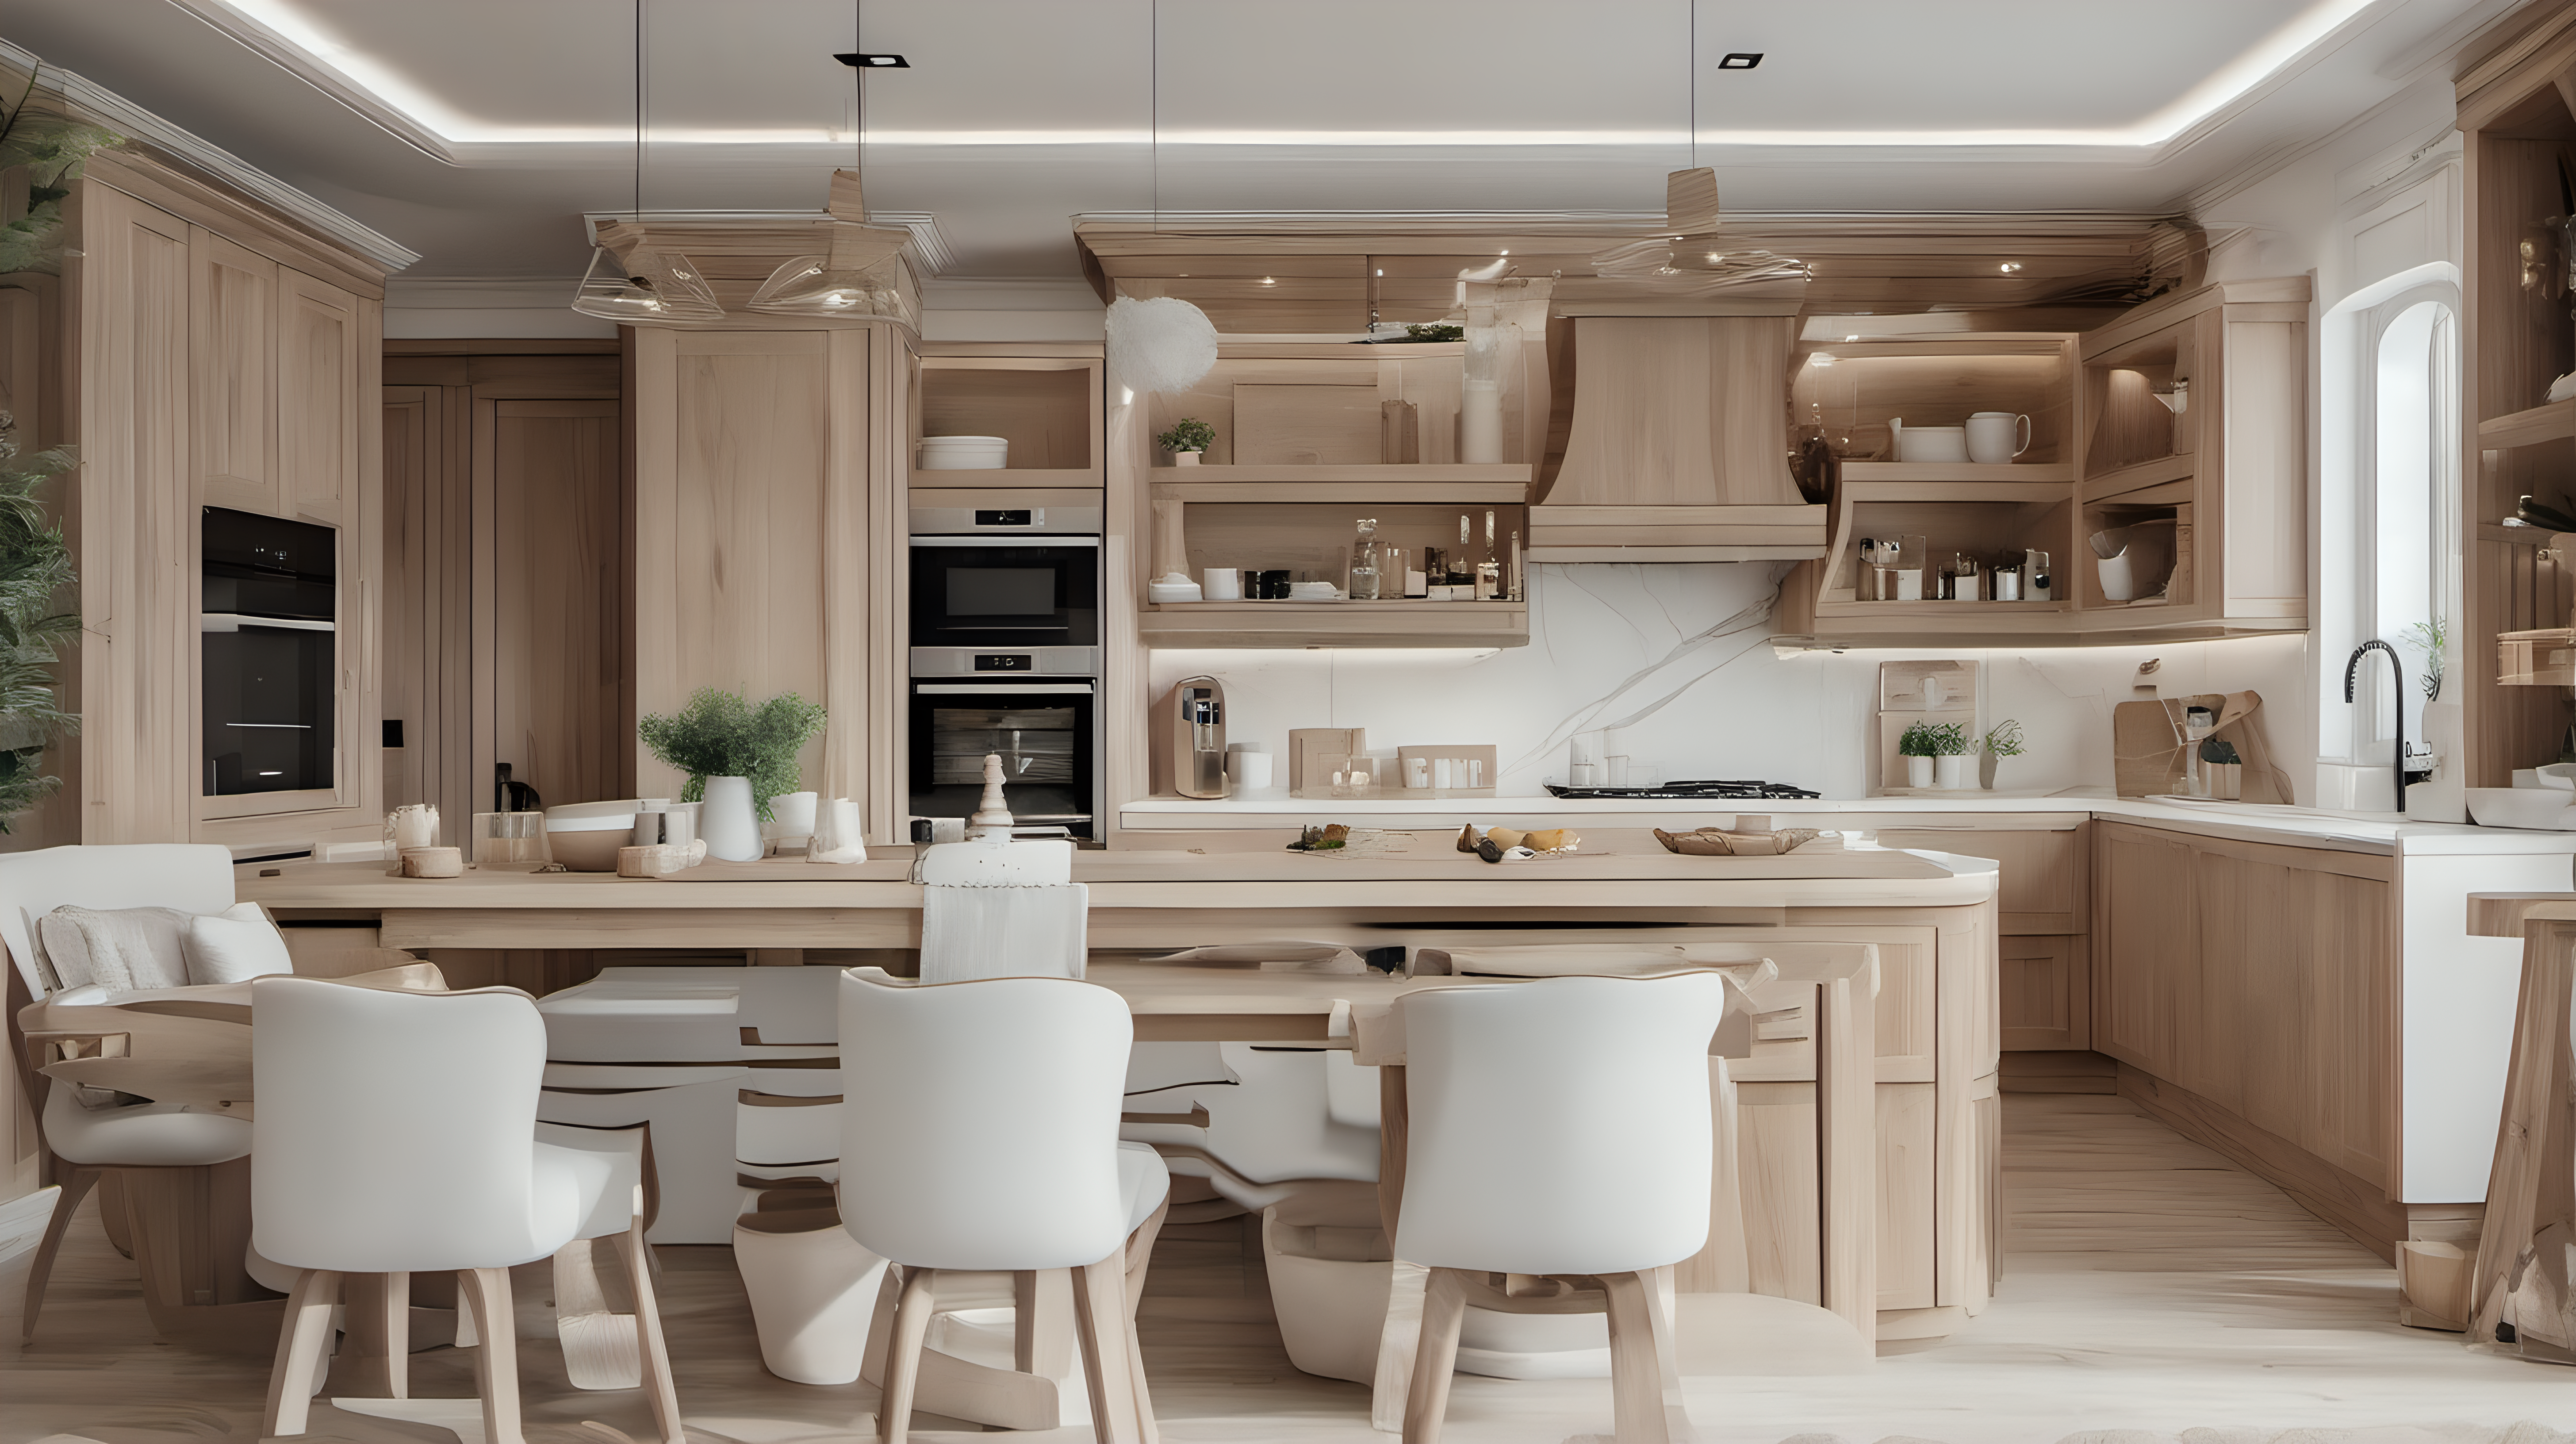 Interior big kitchen with beige and white and